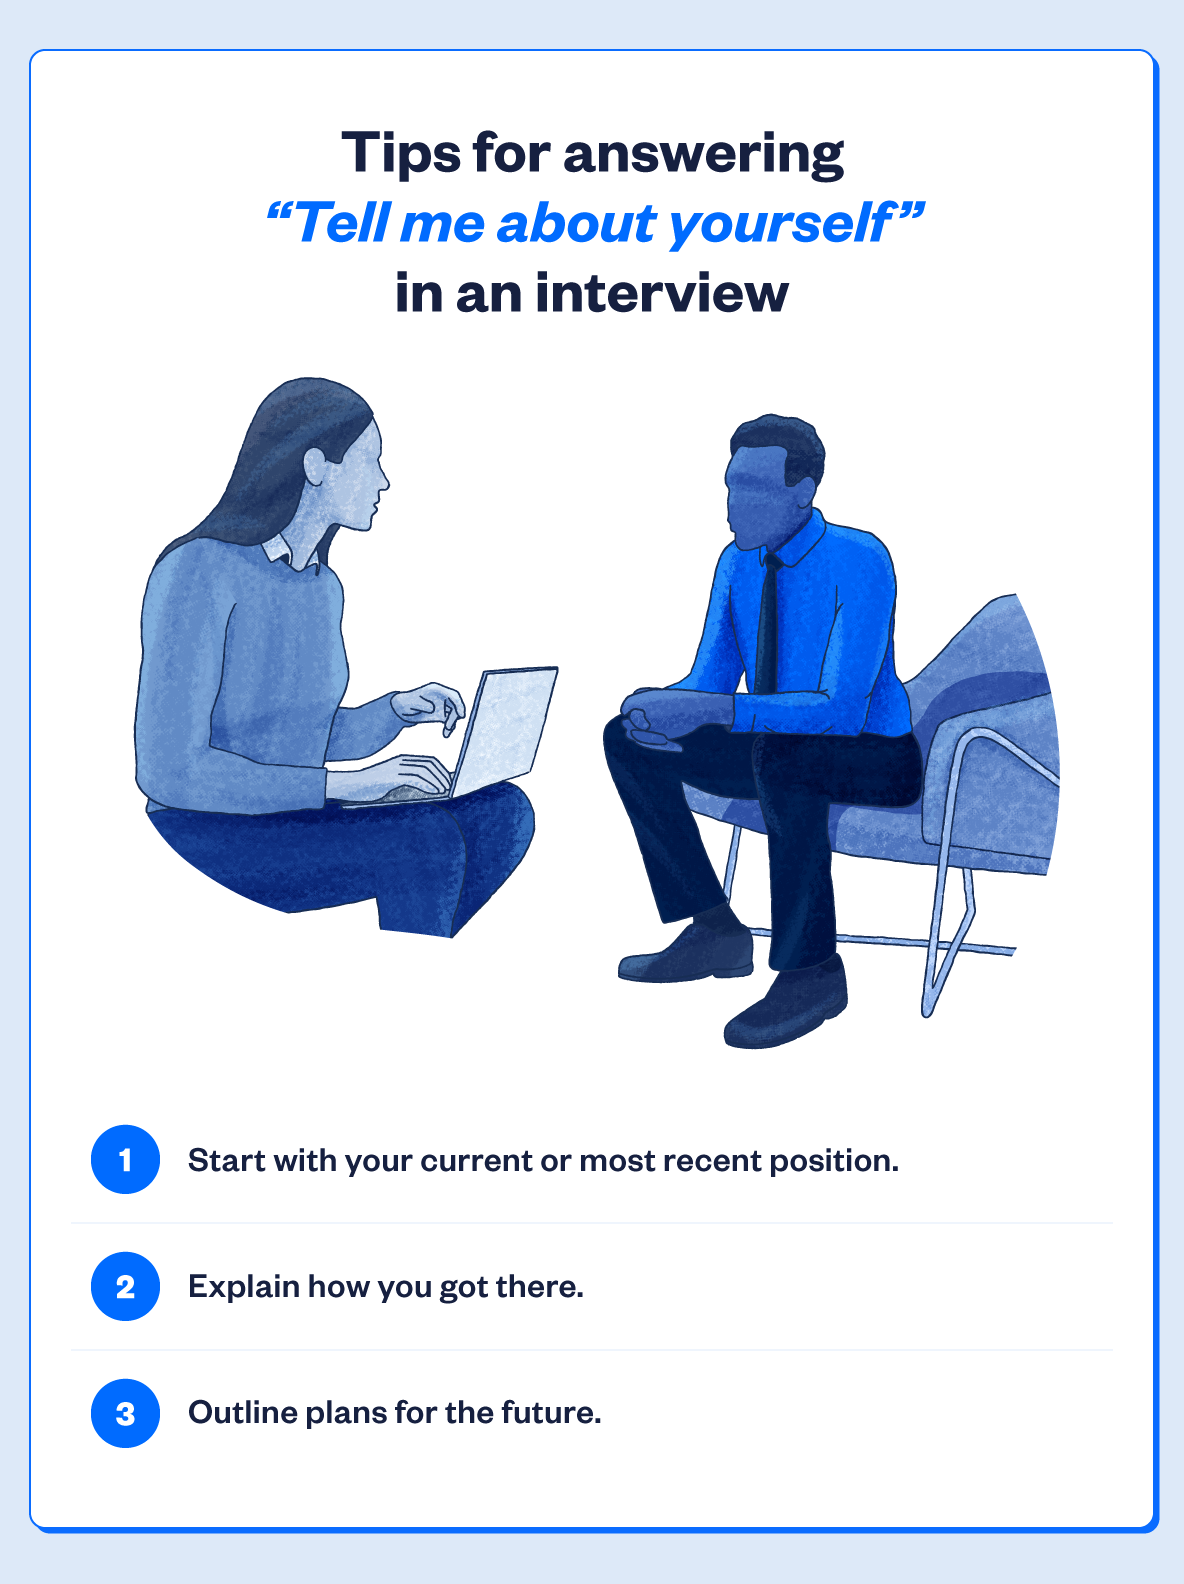 tips-for-answering-tell-me-about-yourself-in-an-interview